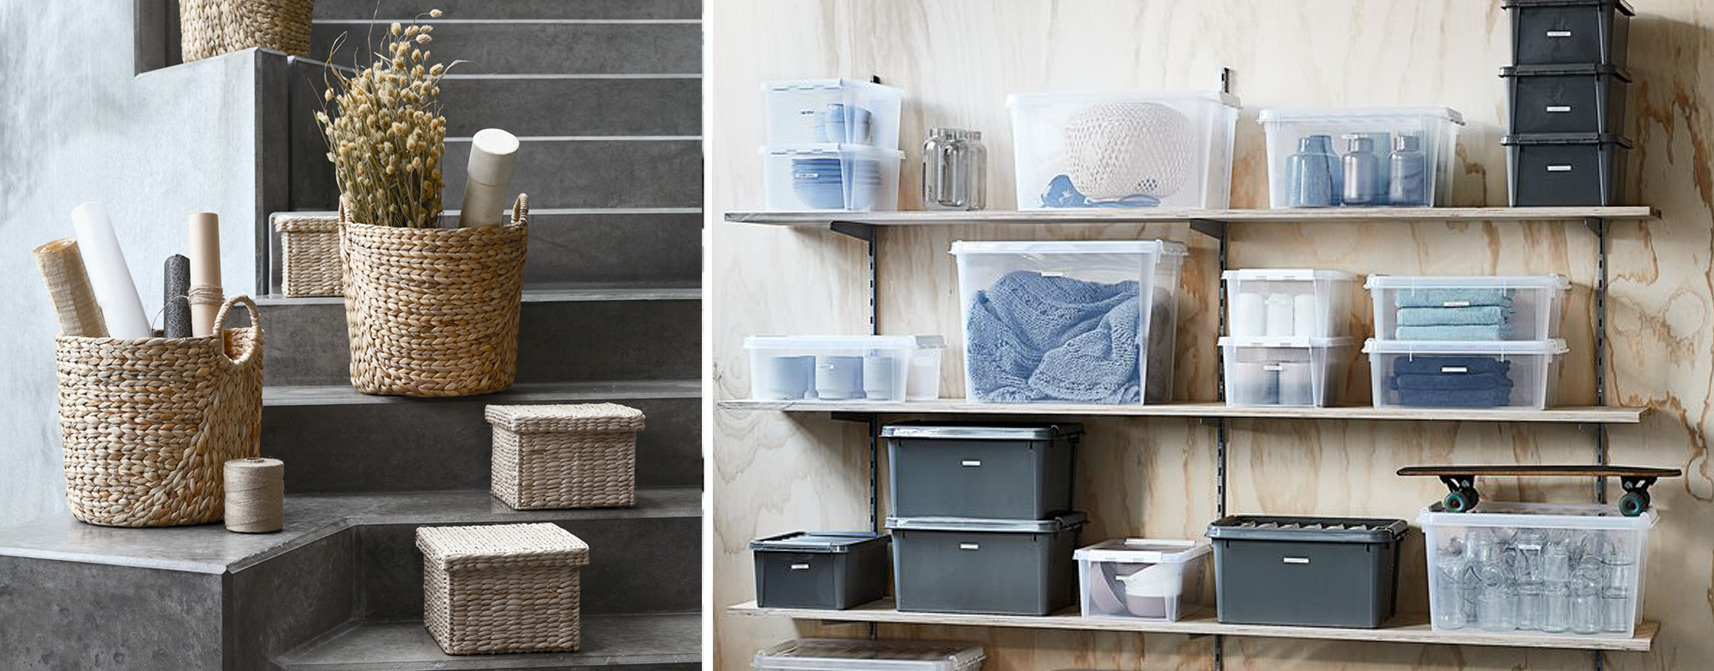 Get ideas for storing toys